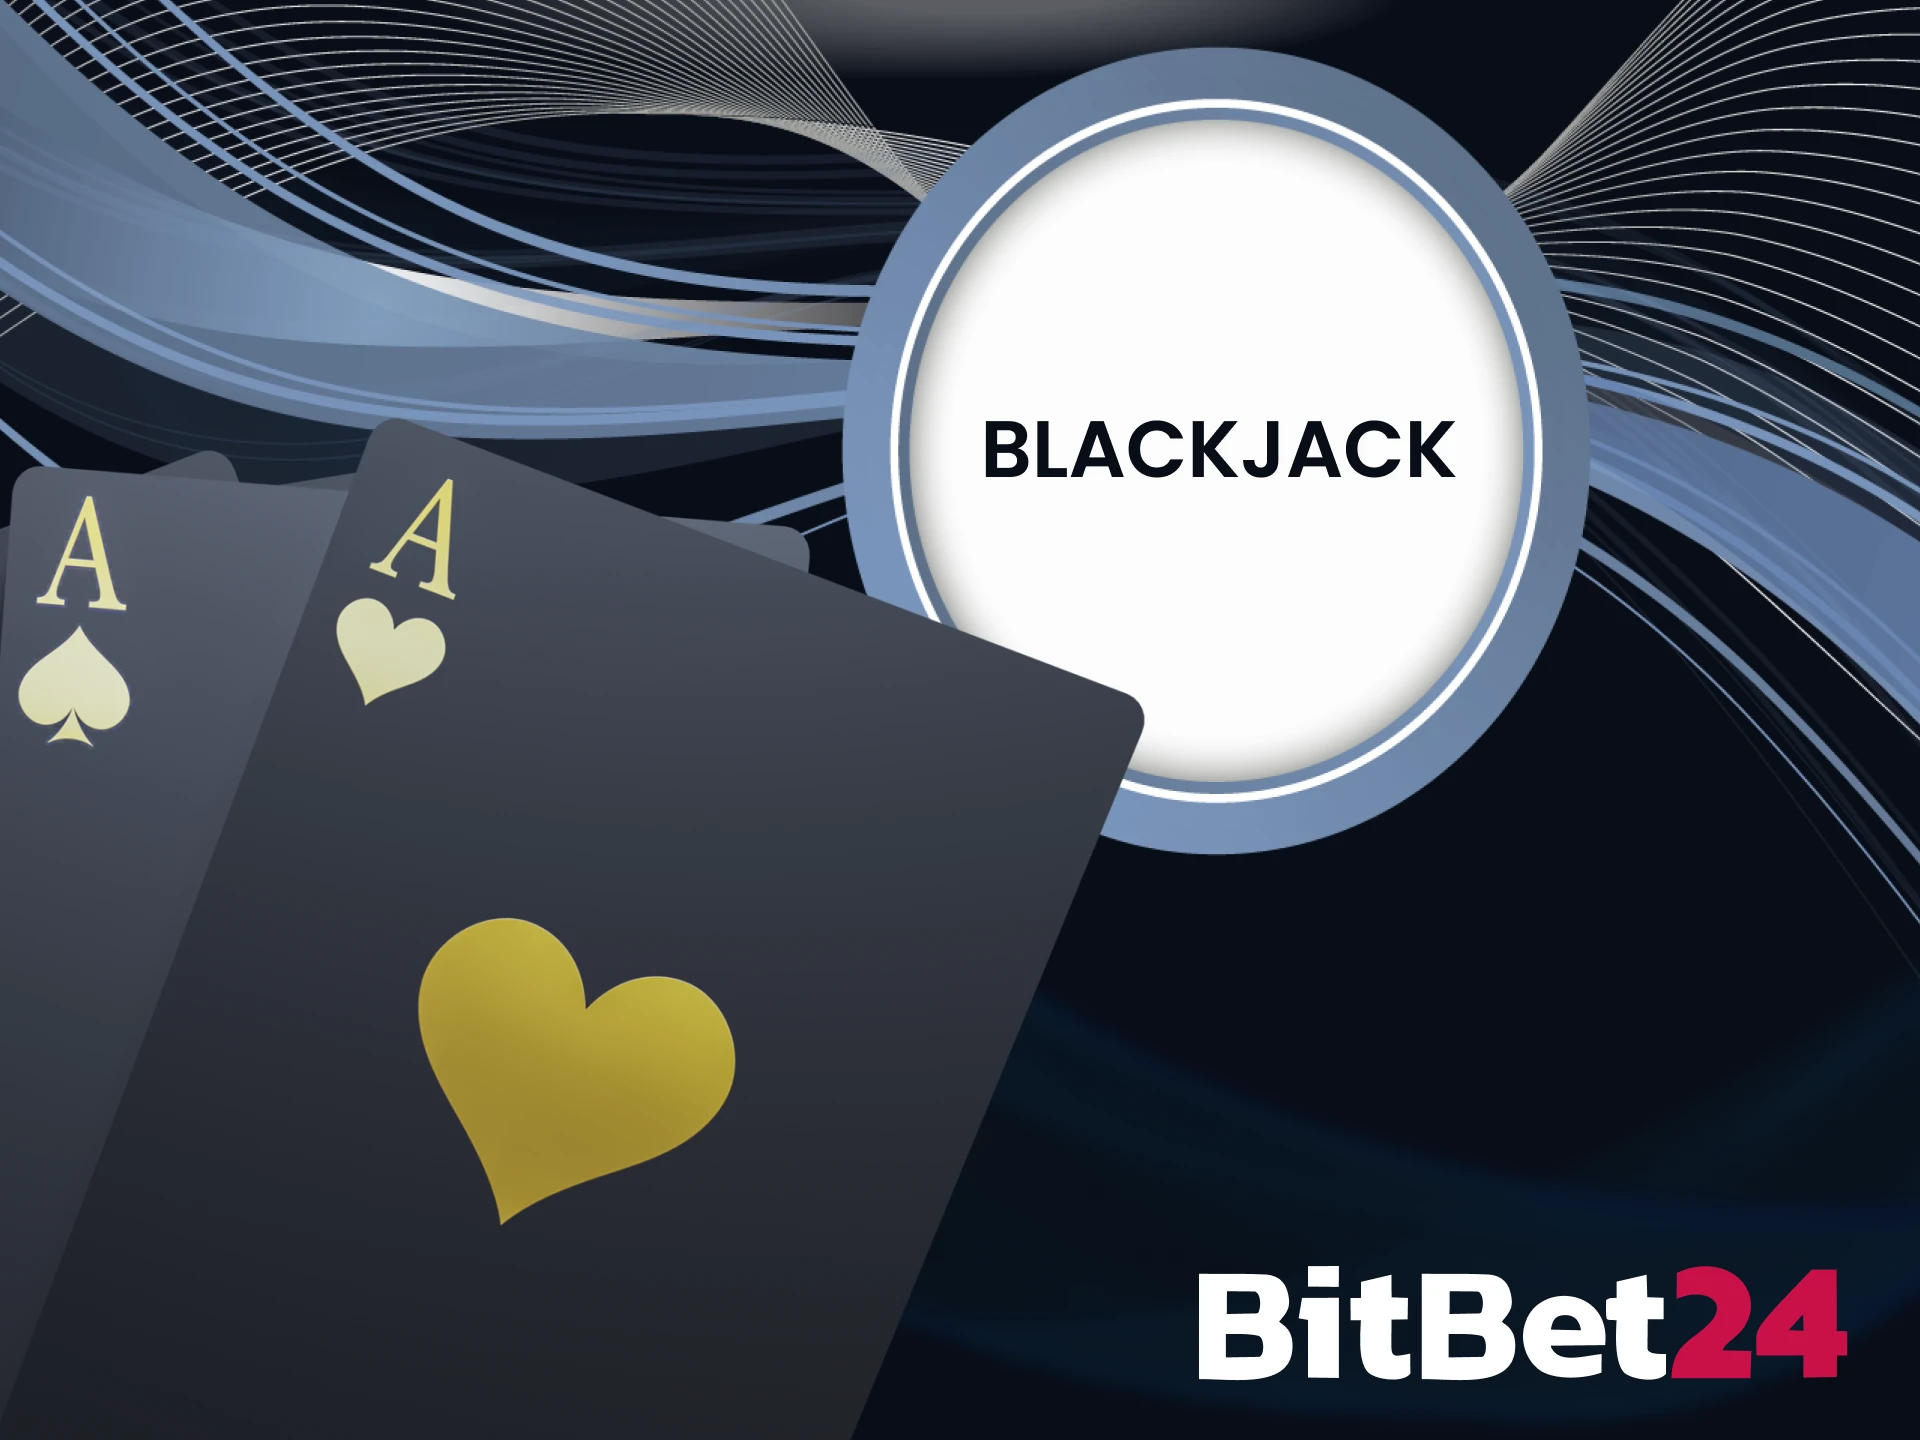 Play blackjack with BitBet24.